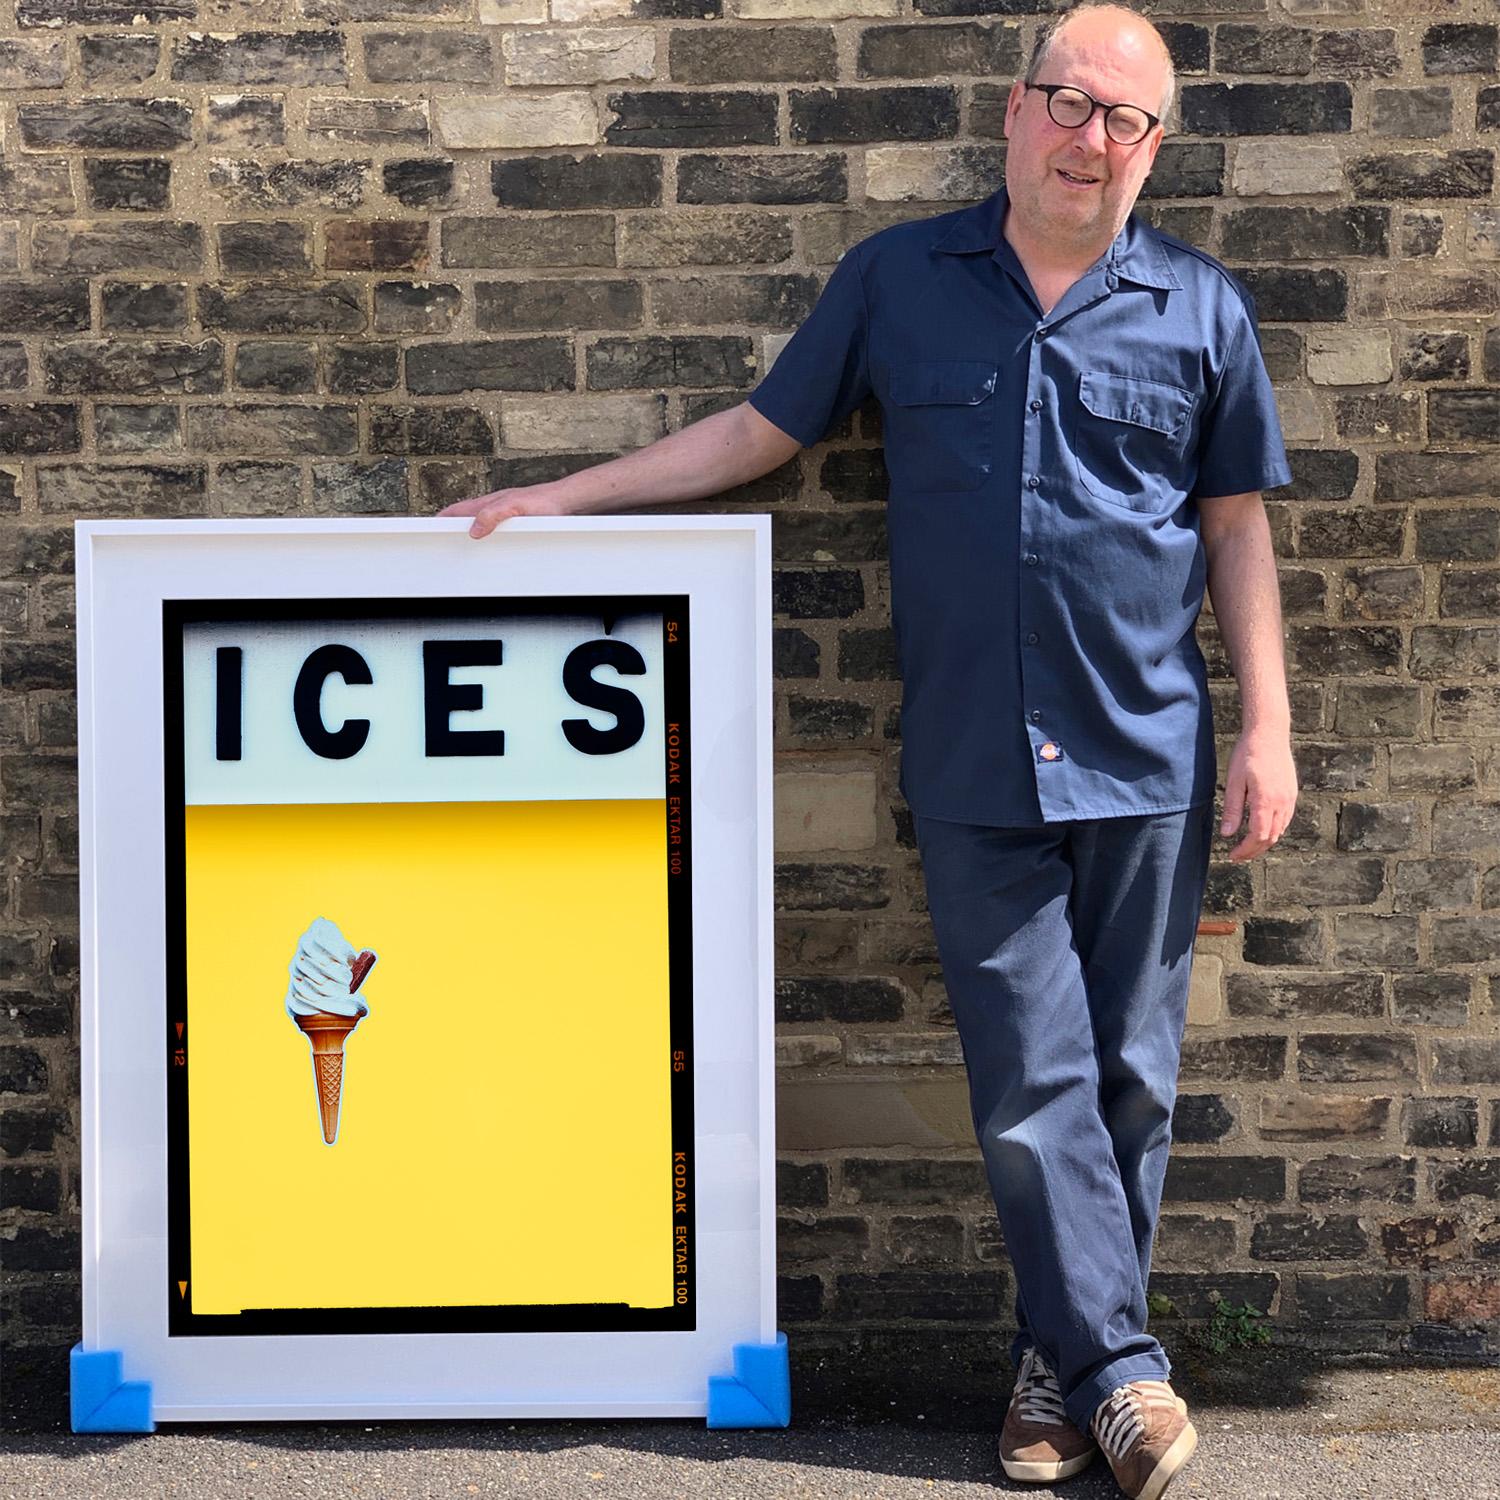 ICES, by Richard Heeps, photographed at the British Seaside at the end of summer 2020. This artwork is about evoking memories of the simple joy of days by the beach. The sherbet yellow color blocking, typography and the surreal twist of the